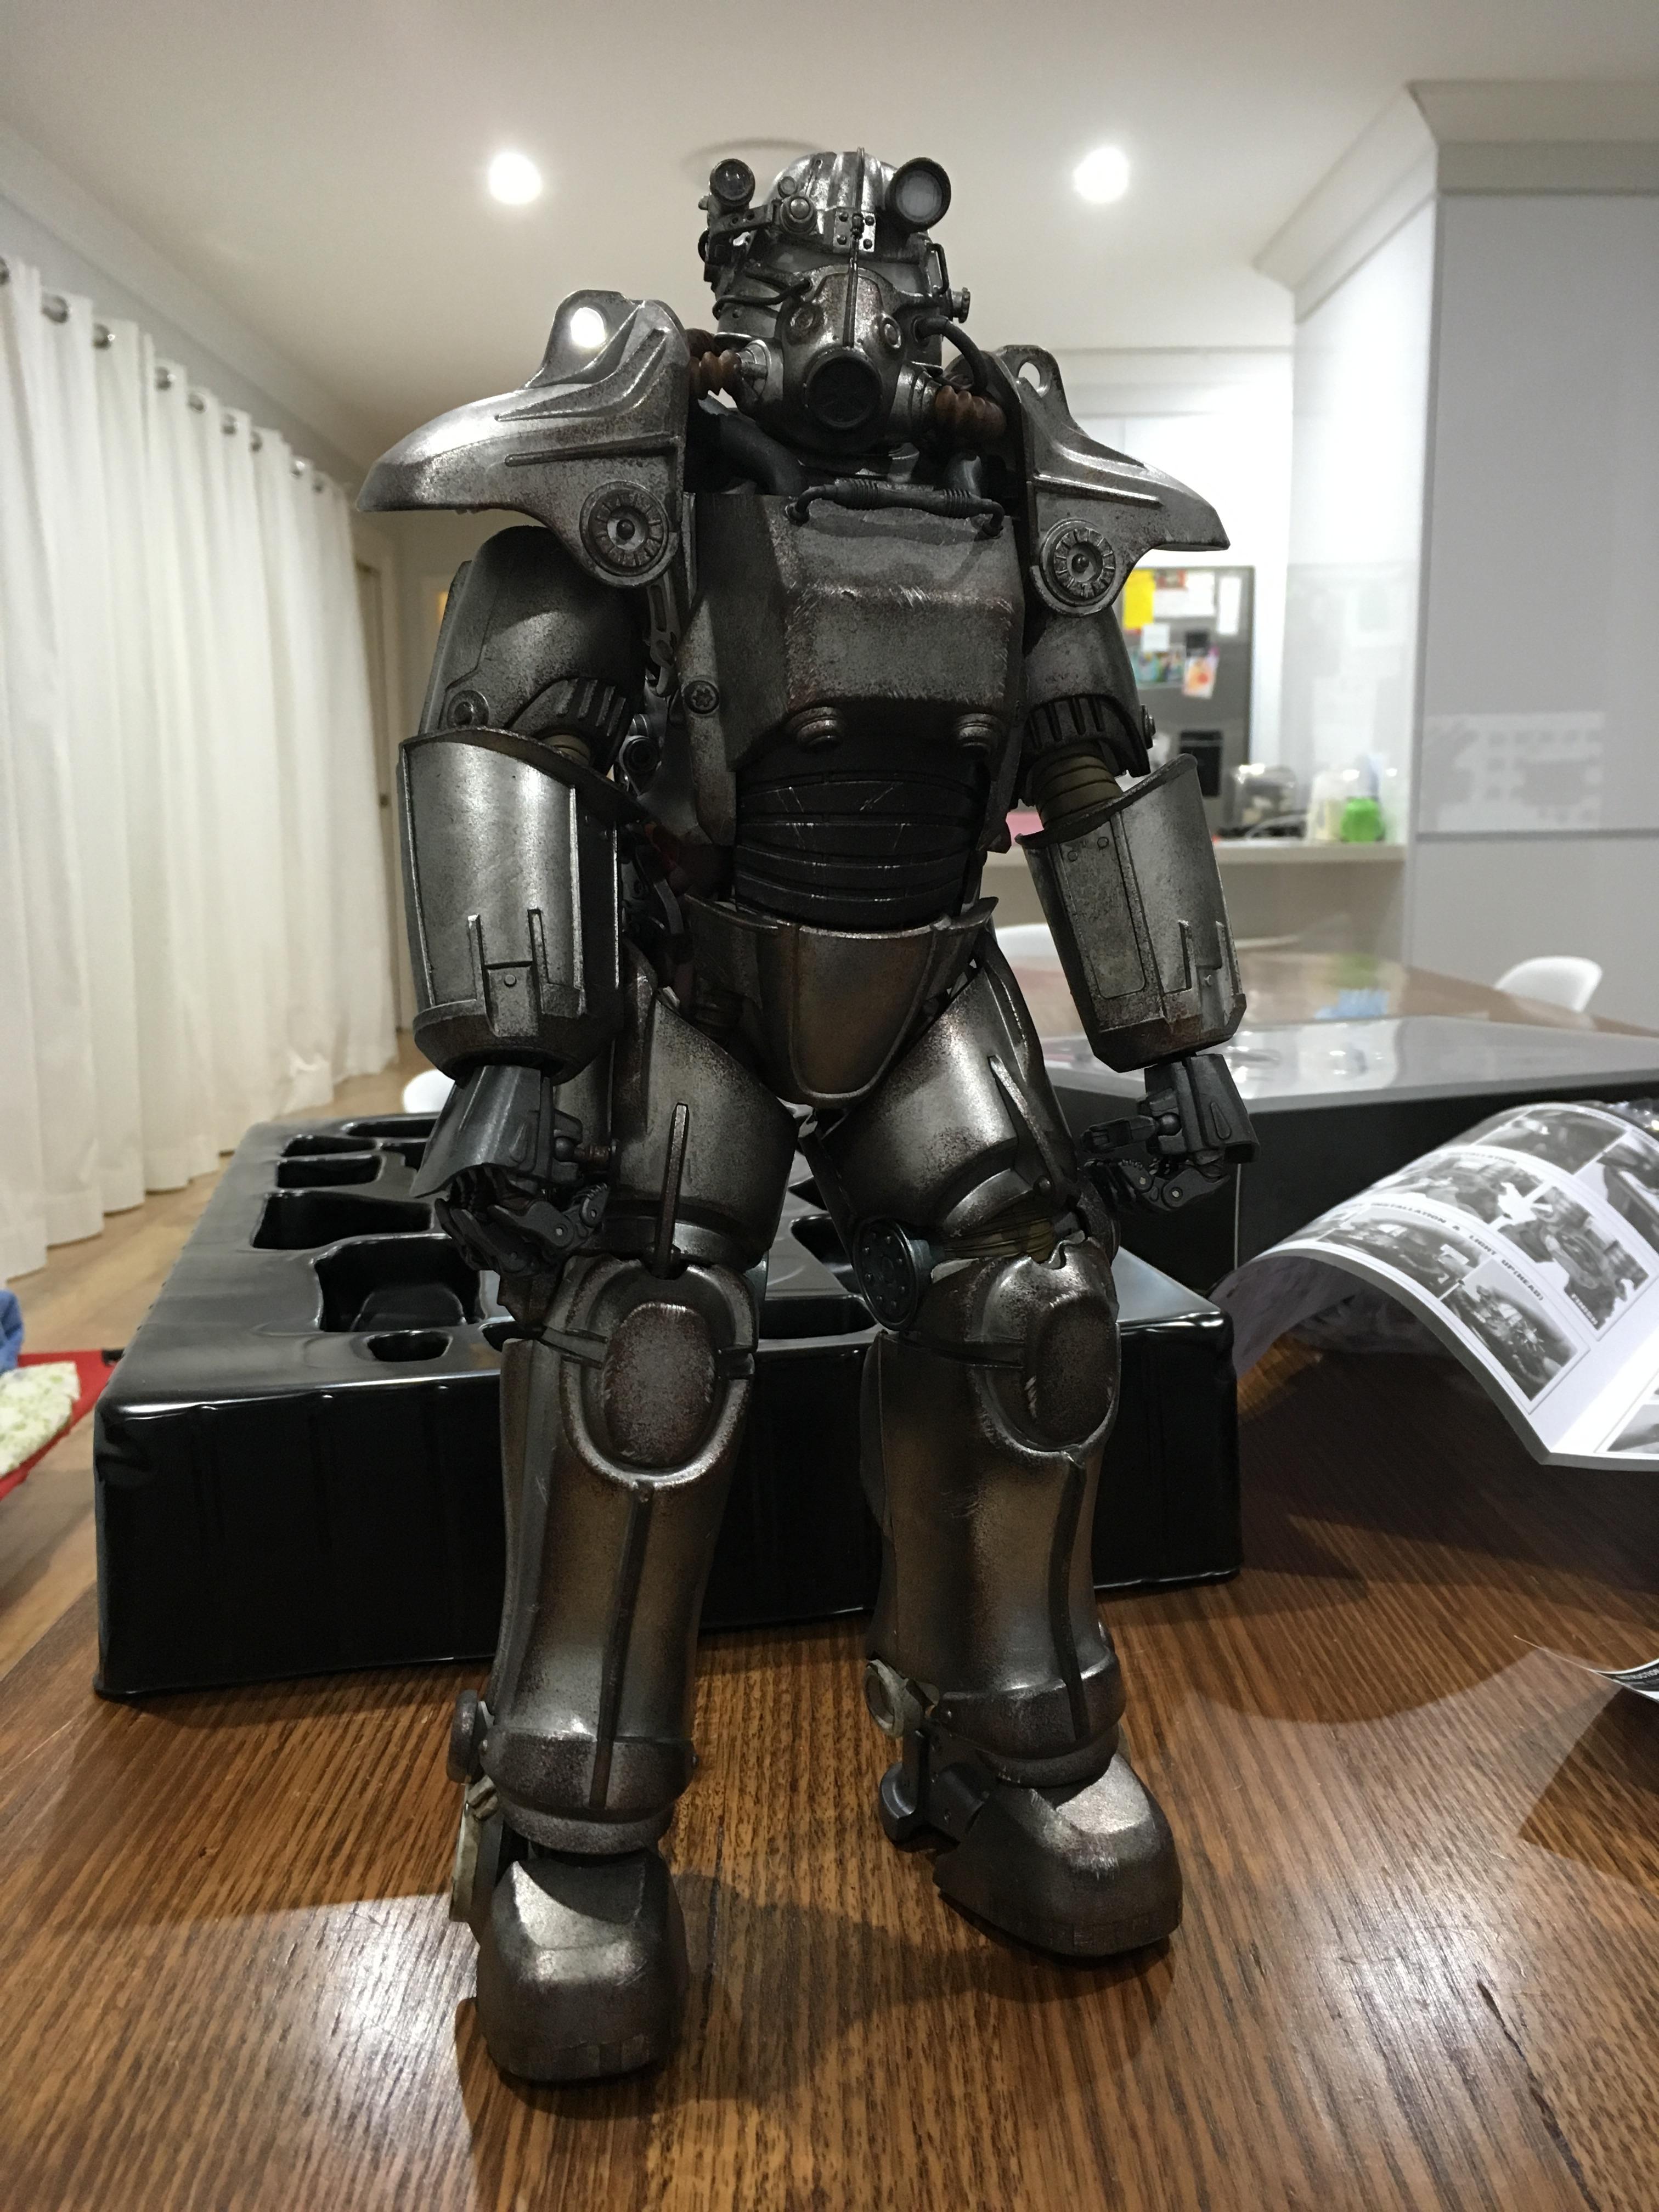 The Fallout 4 T45 Power Armor Figurine Is Pure Epicness.